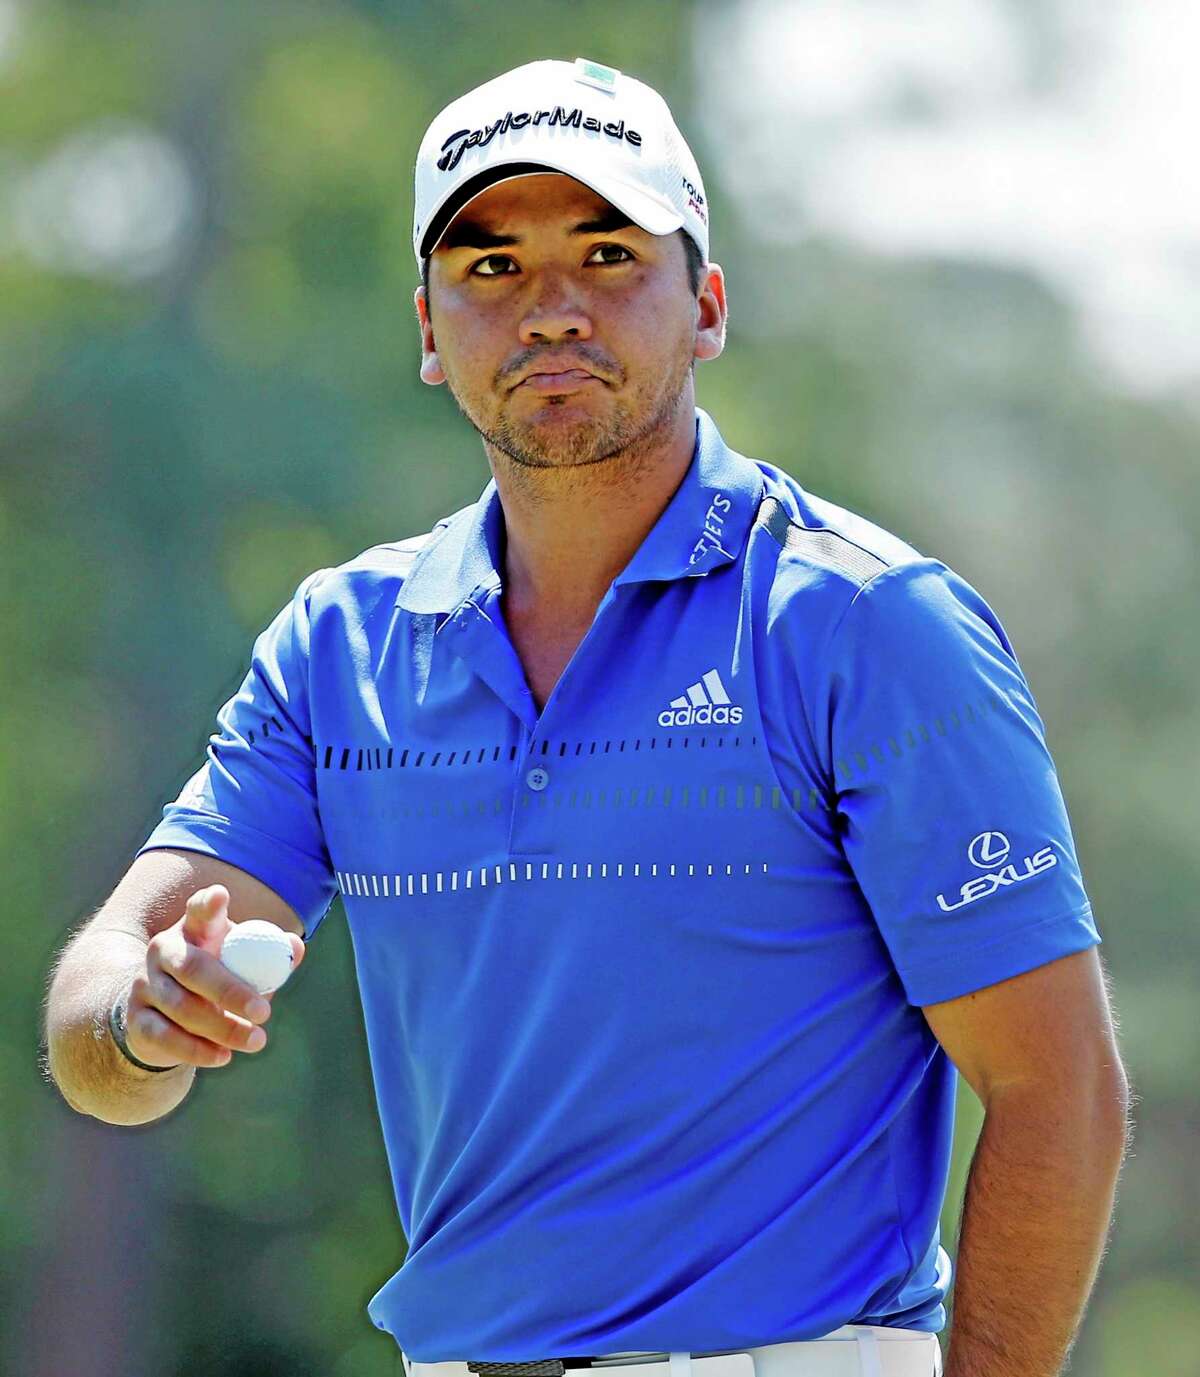 Jason Day headlines the latest group of commitments to this year’s Travelers Championship field.